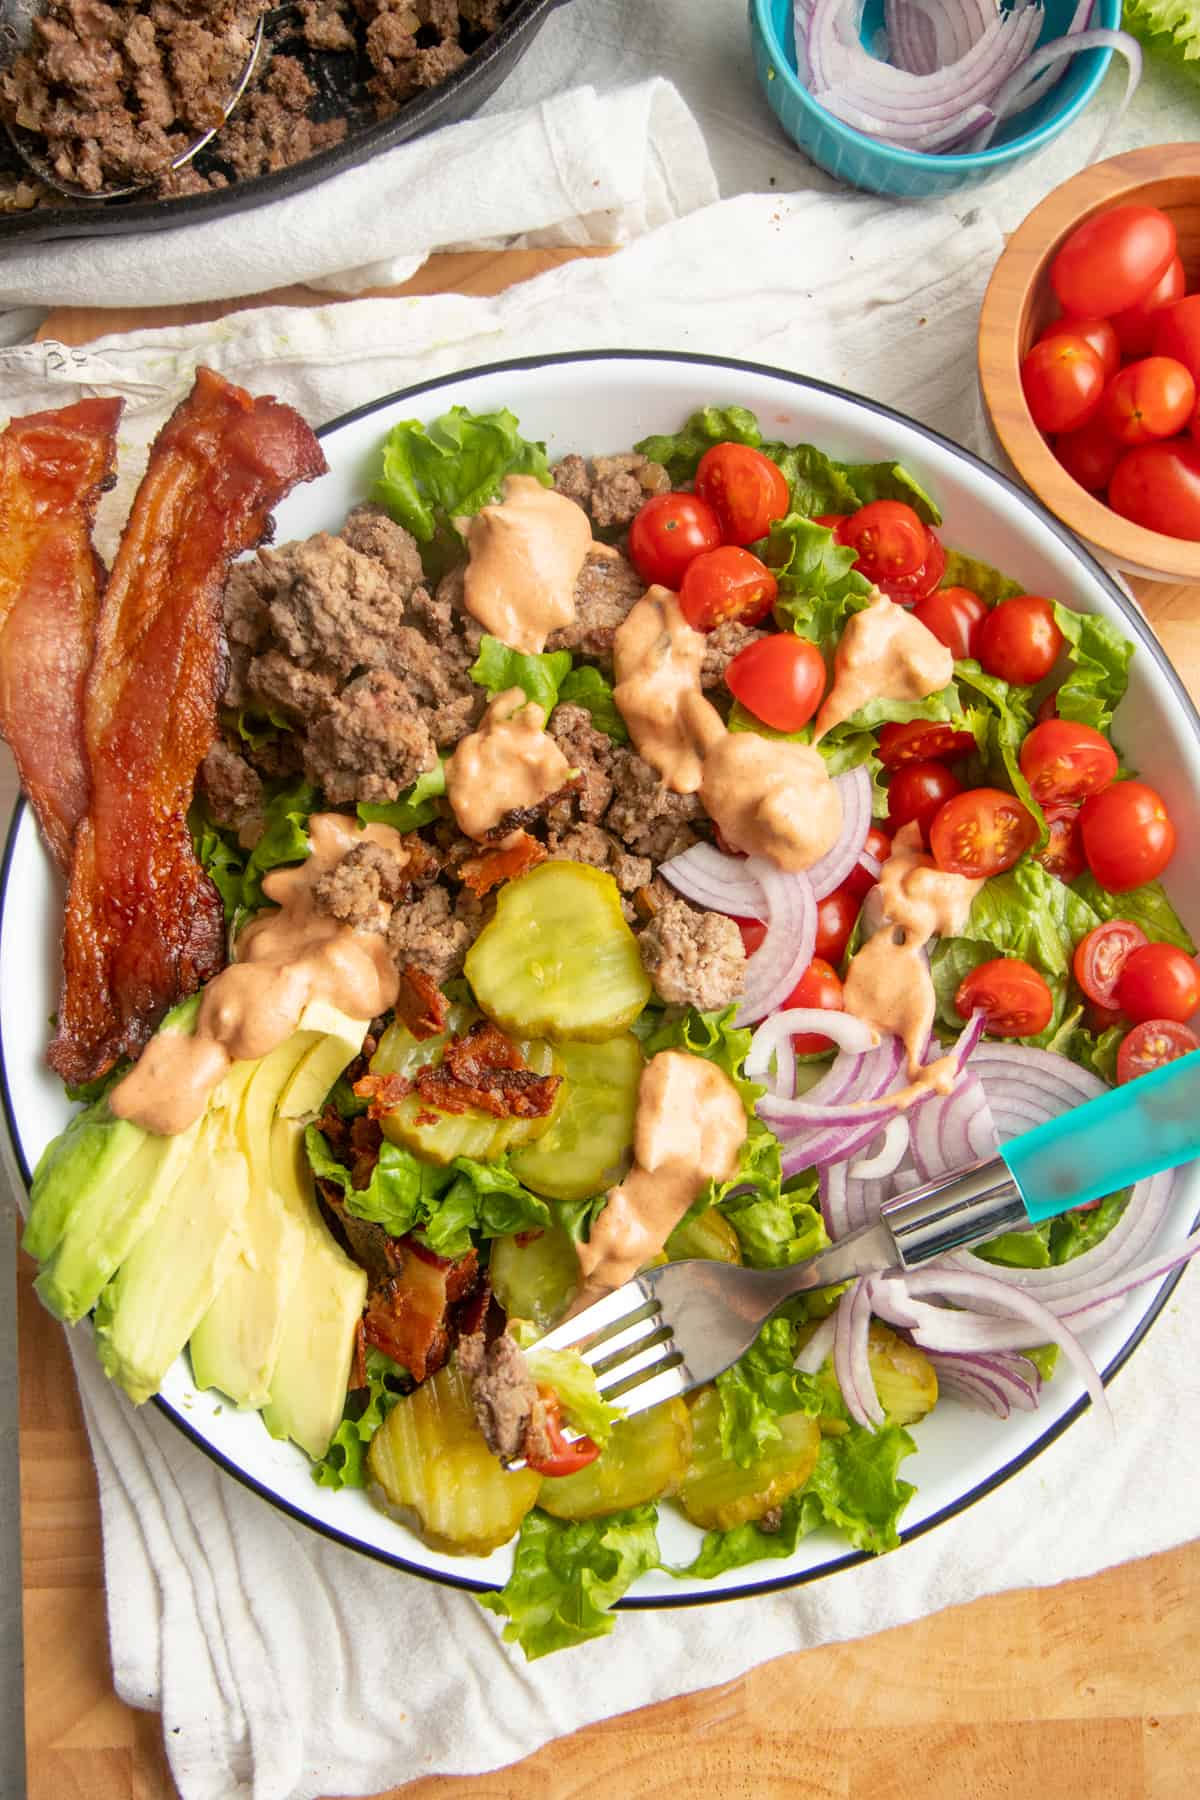 A fork with a blue handle rests in a large bowl filled a loaded burger bowl salad.